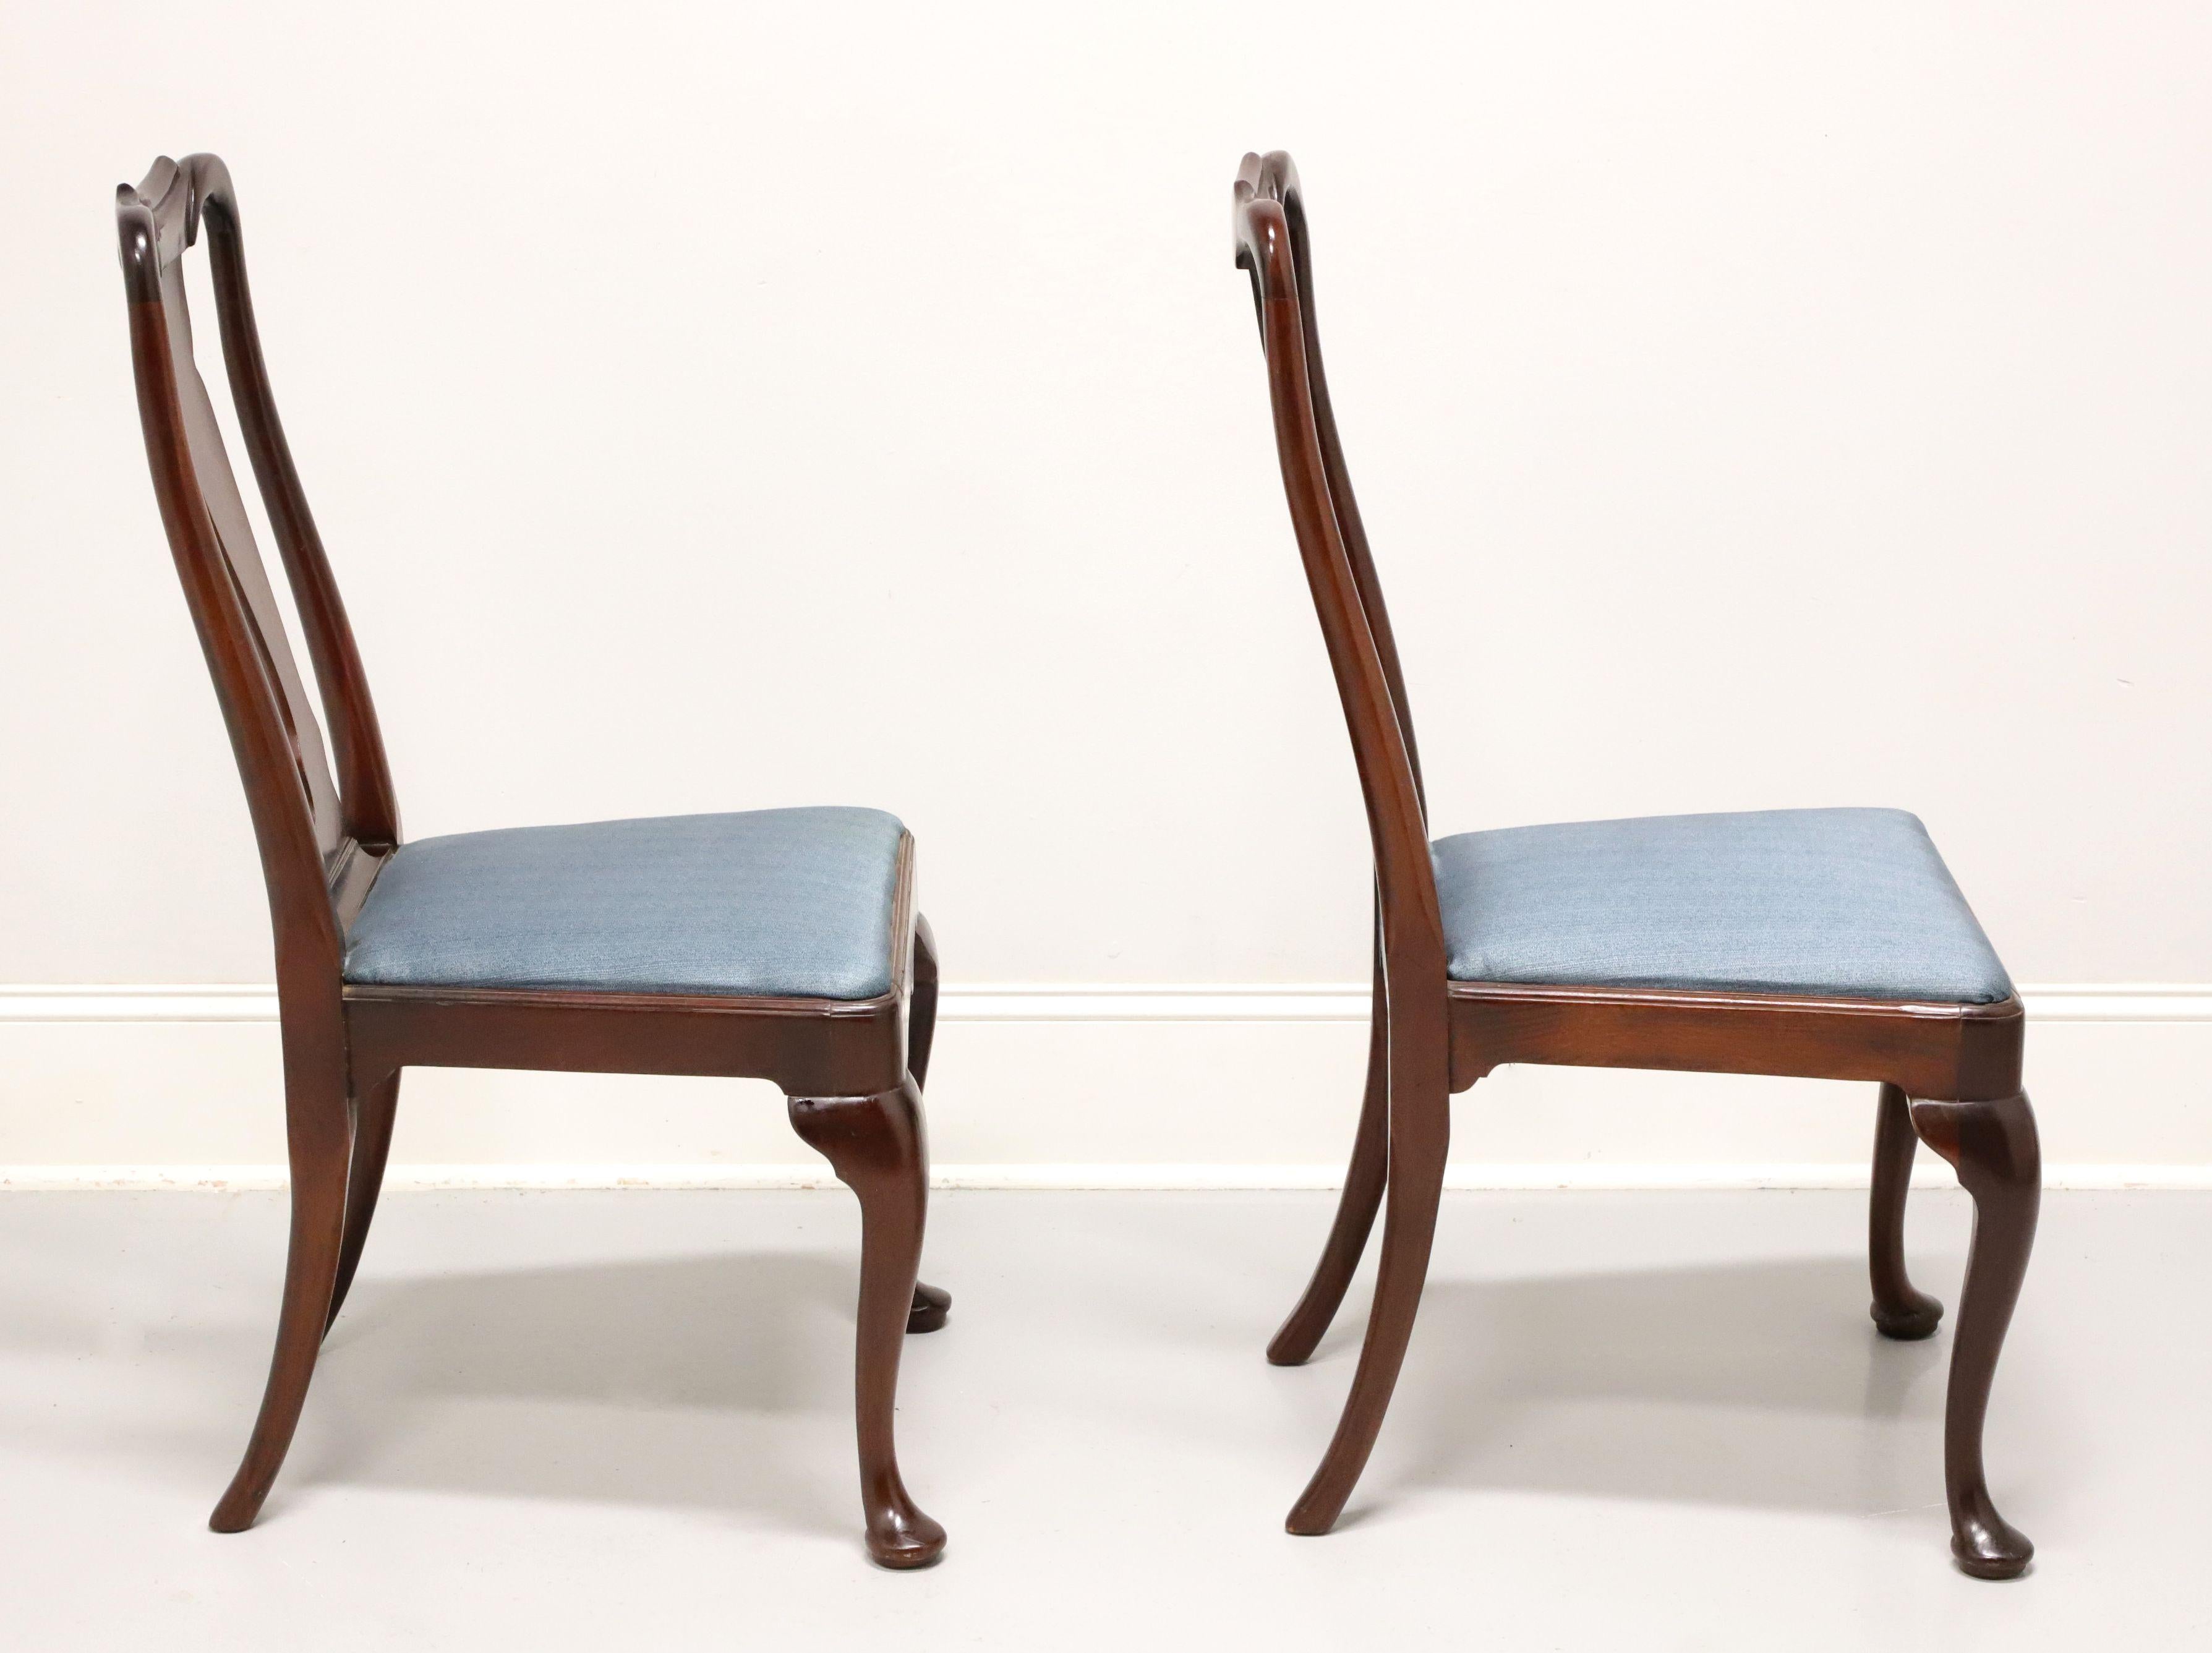 American HICKORY CHAIR Solid Mahogany Queen Anne Style Dining Side Chairs - Pair 